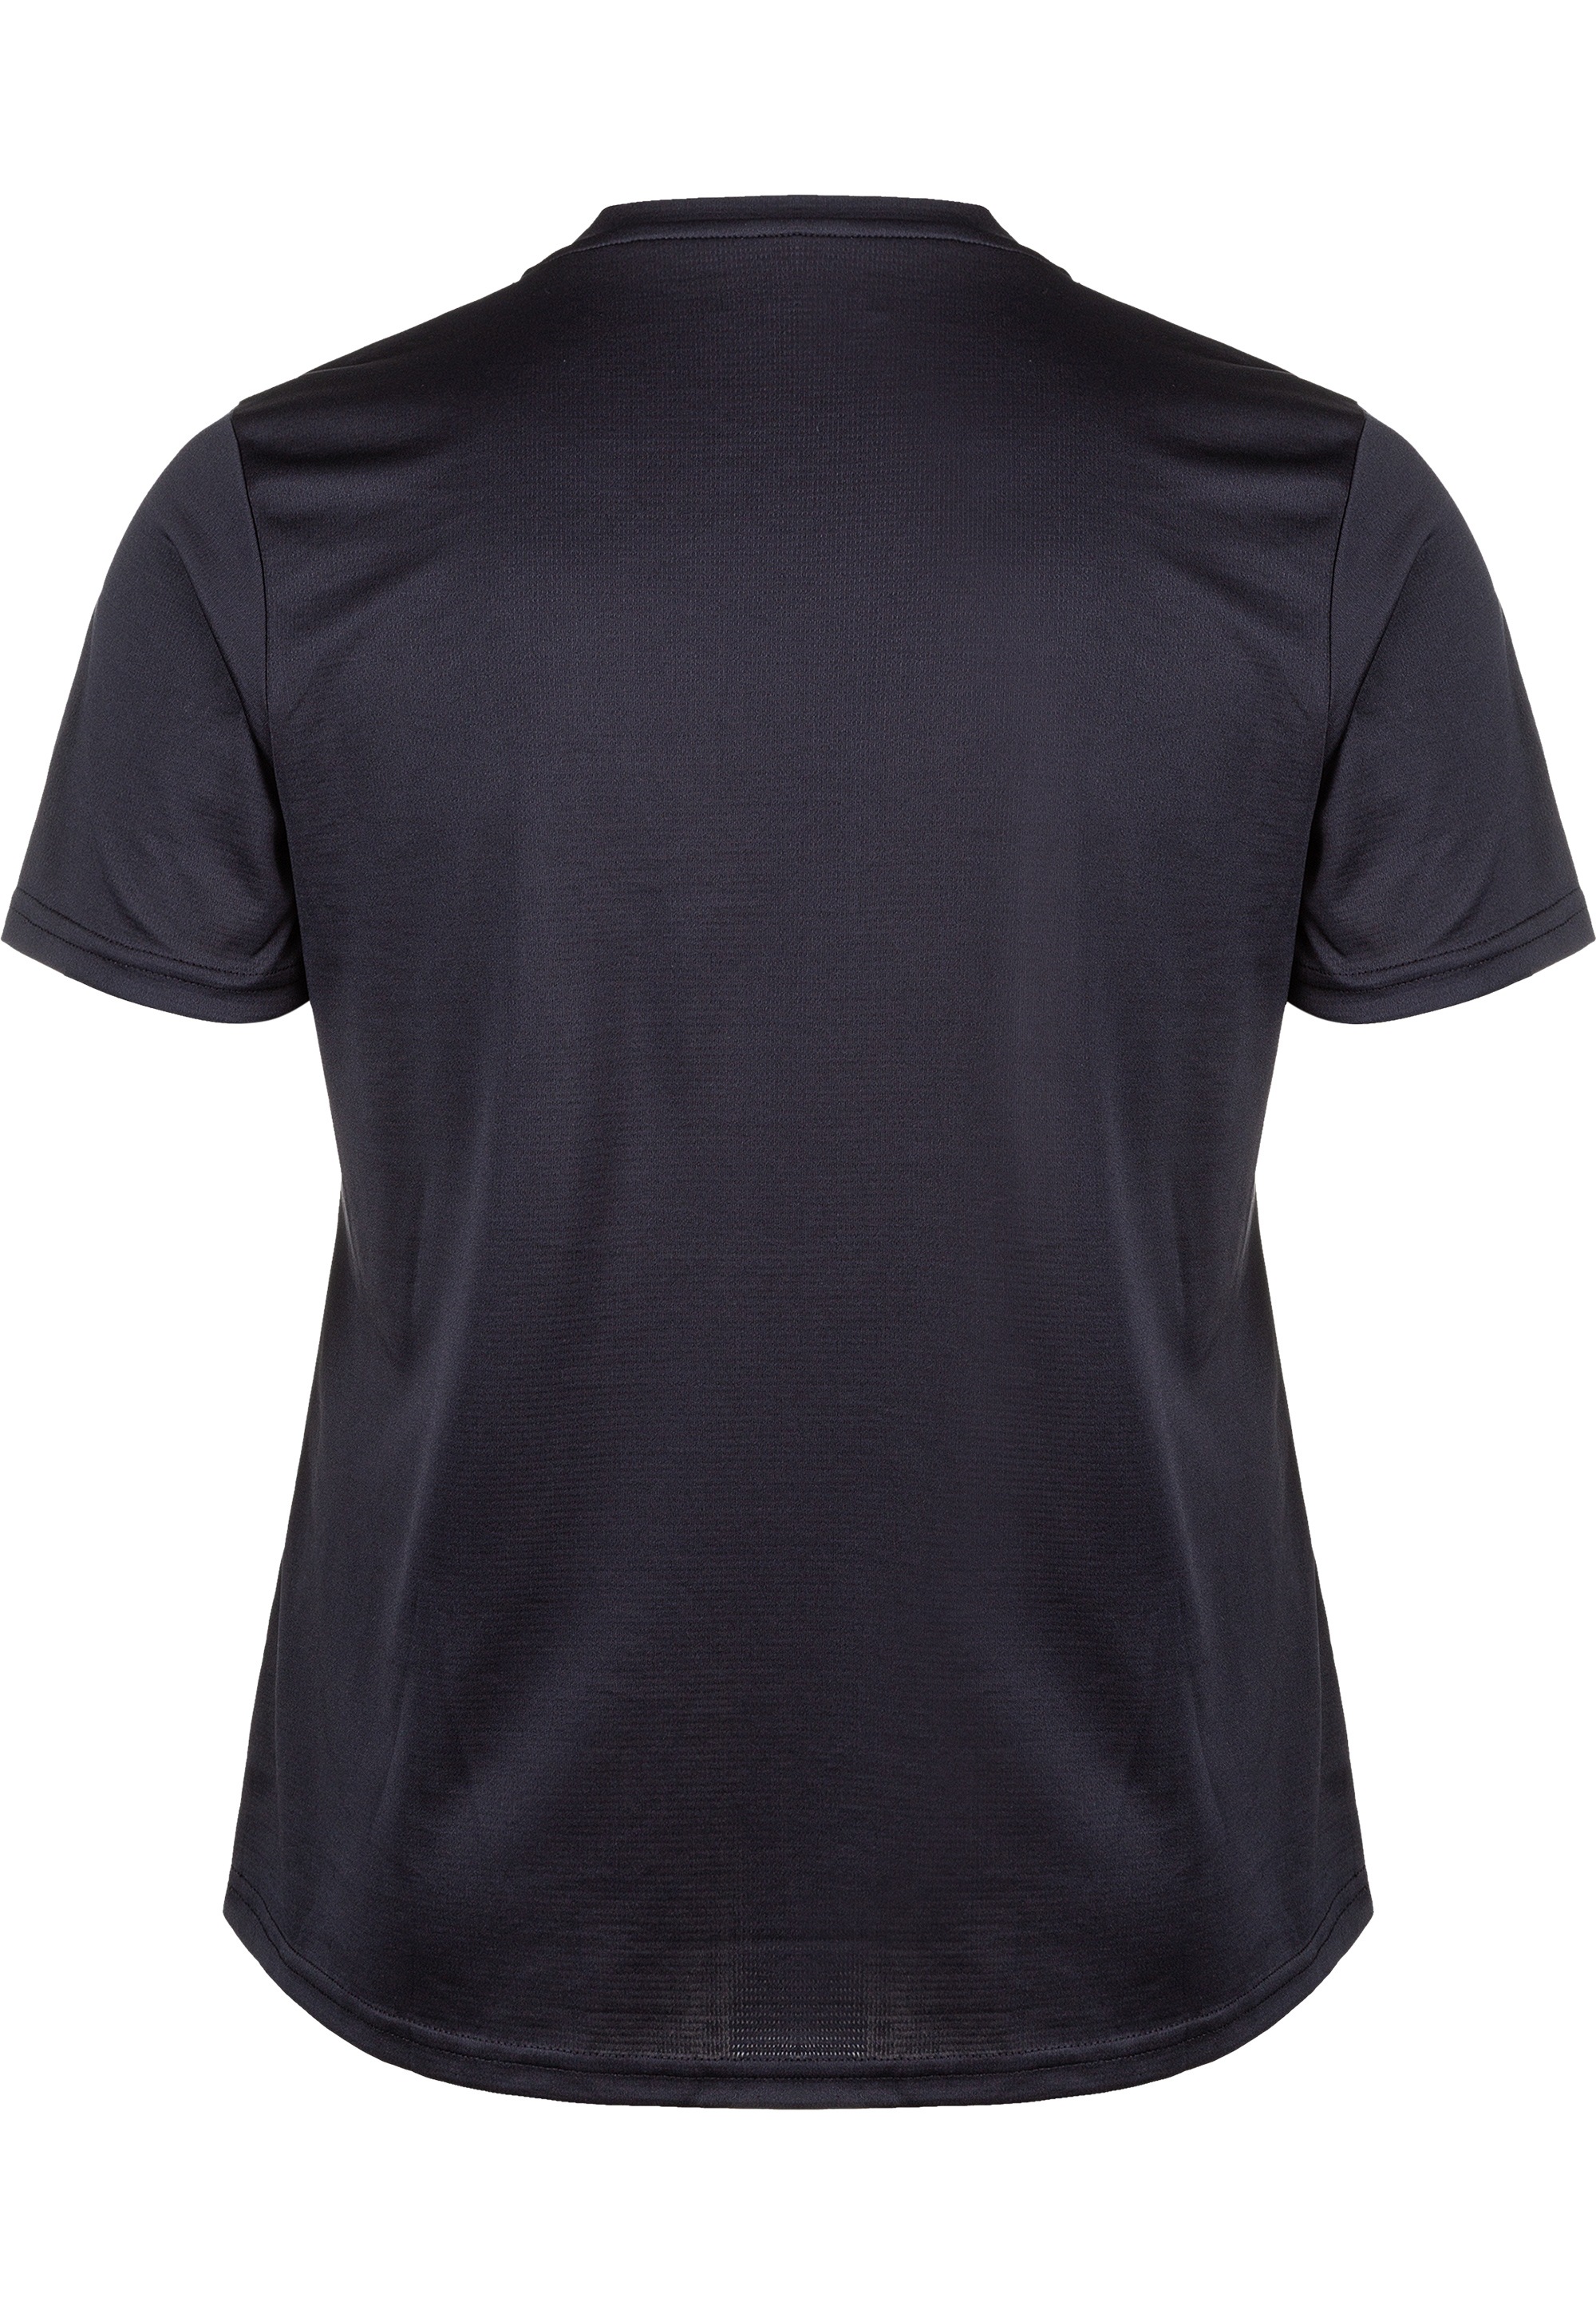 Q by Endurance Funktionsshirt »ANNABELLE«, (1 tlg.), mit QUICK DRY-Technologie